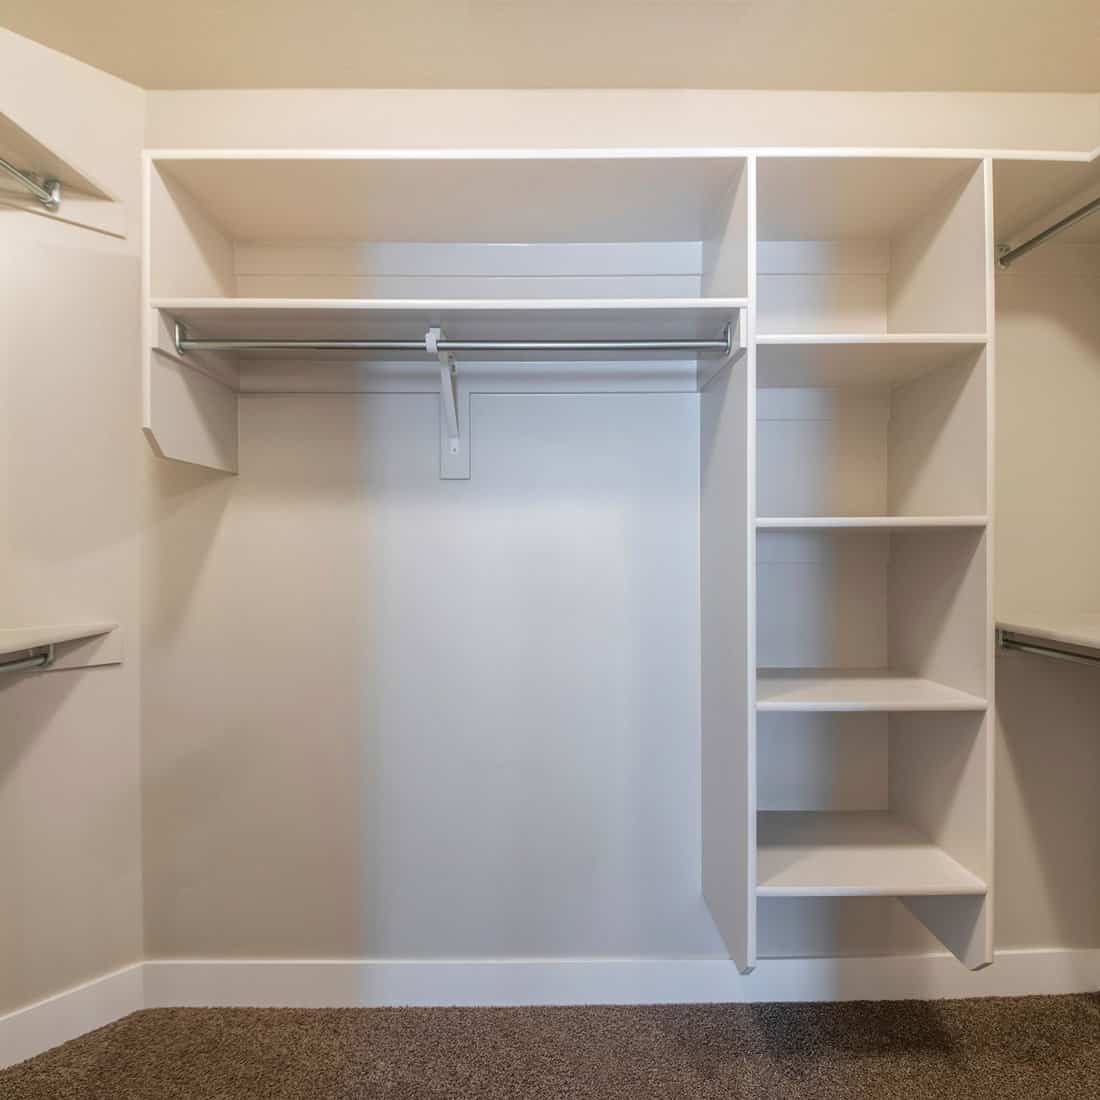 Square frame interior of a small walk-in closet with carpeted floor 